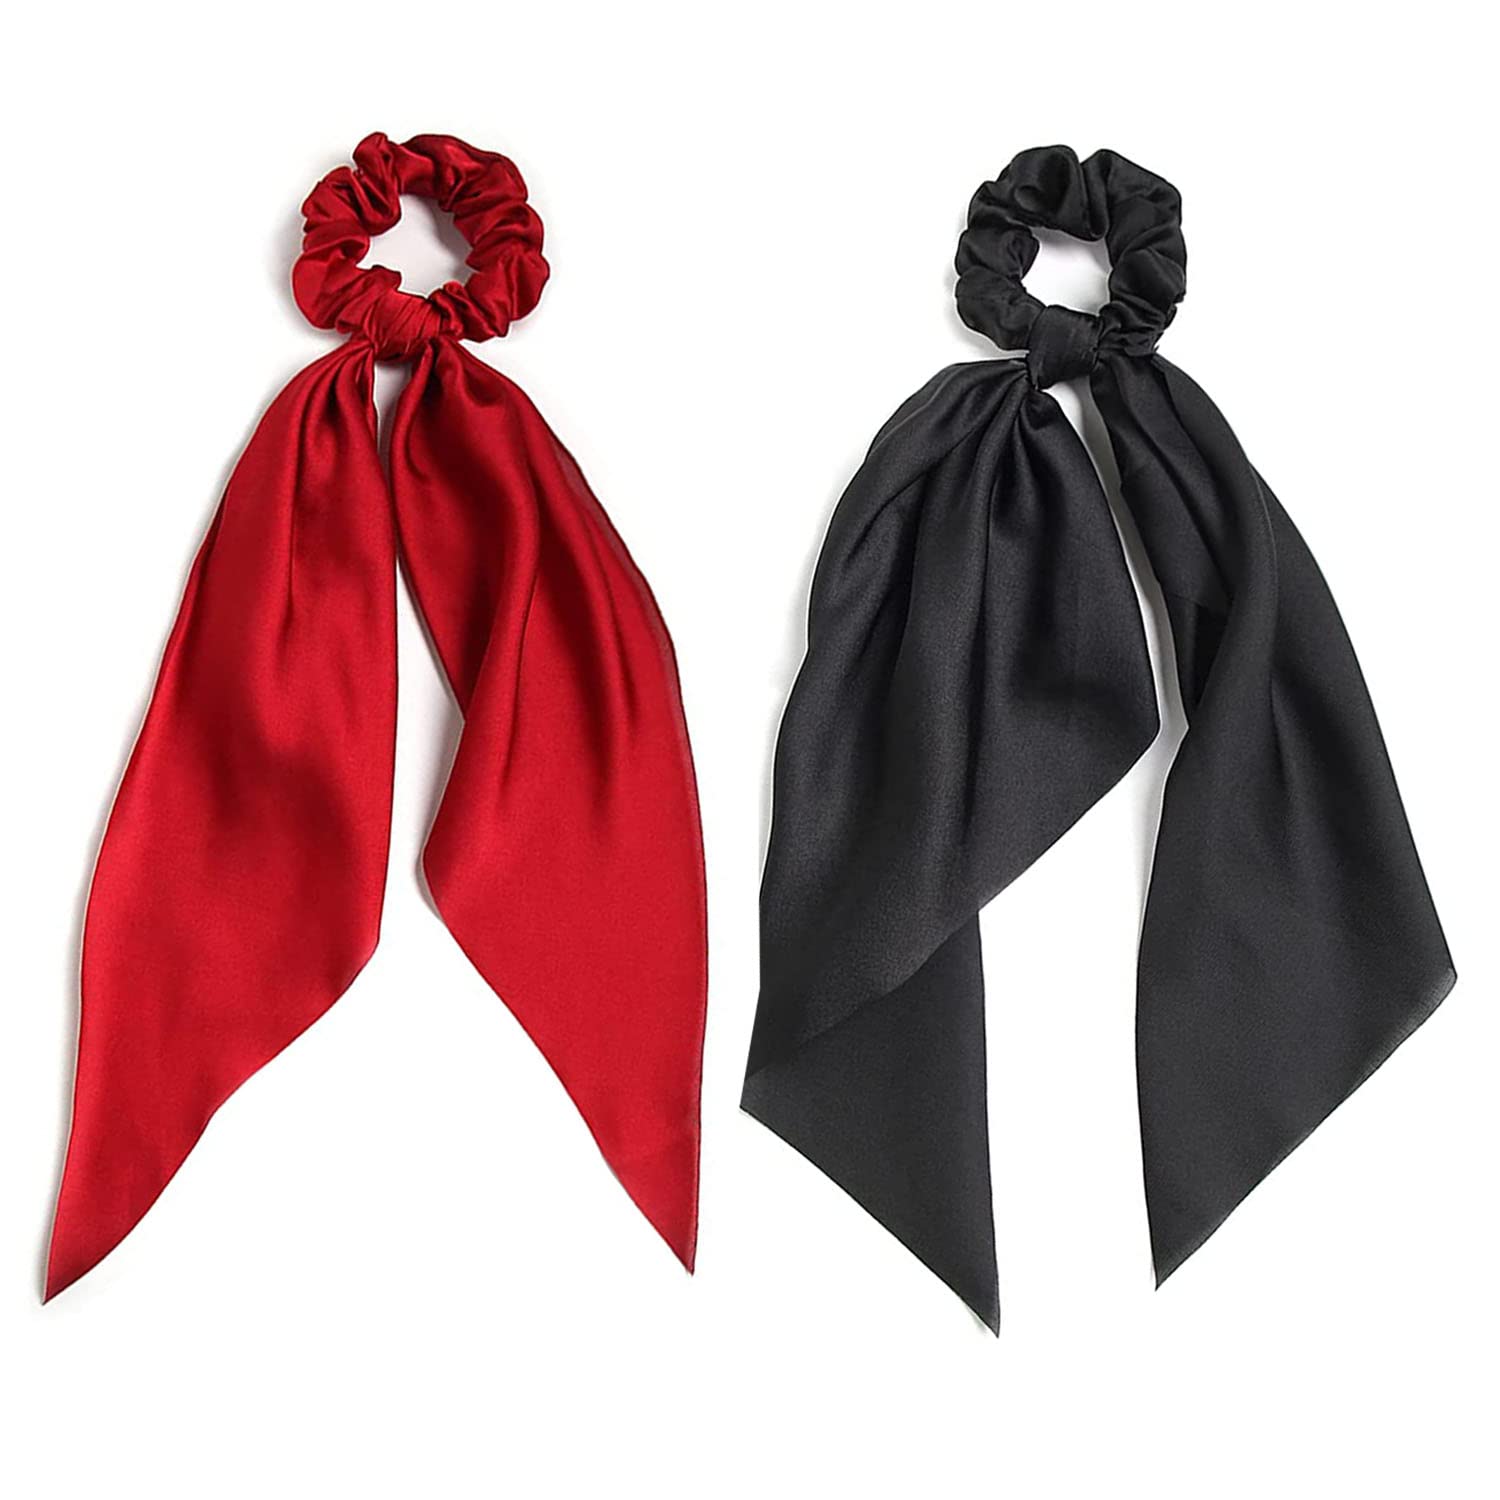 2 PCS Hair Scrunchies Scarf Red Black Hair Ribbon Satin Silk Elastic Hair  Tie Bow Bands Ponytail Holder Accessories for Women Girls Black & Red